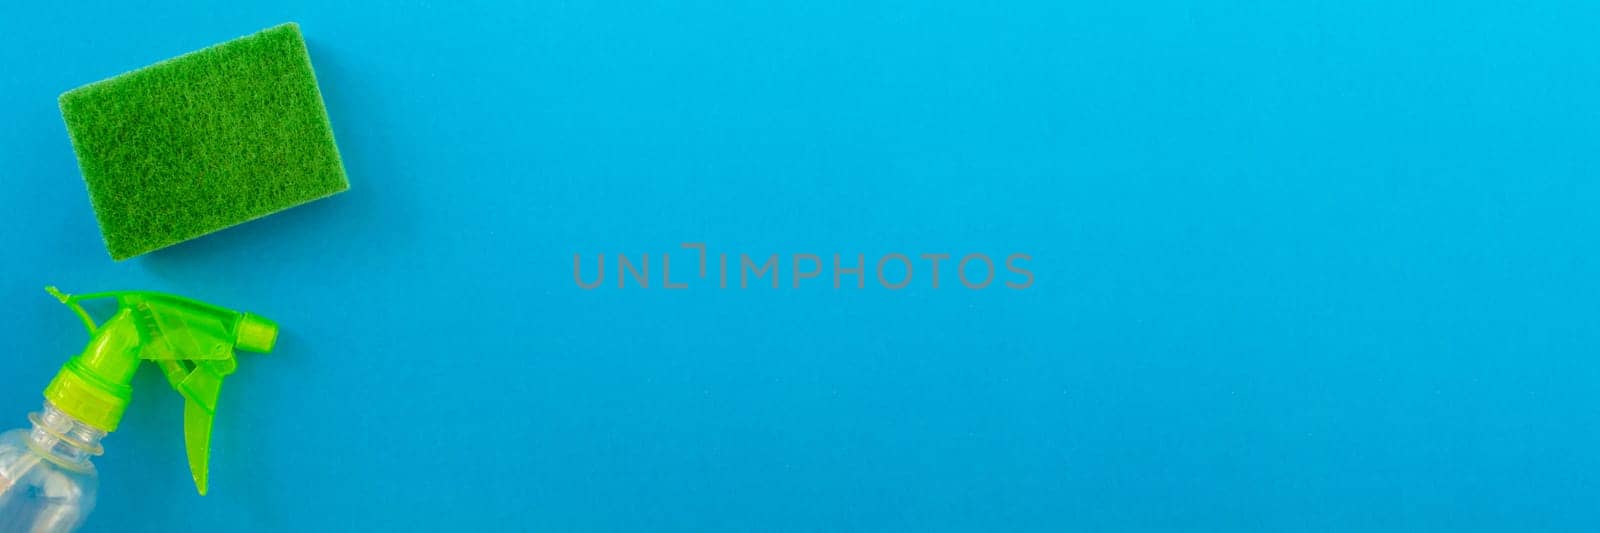 Banner.  Cleaning. Flat lay green sponge and cleaning product on a blue background. Cleaning supplies, top view.